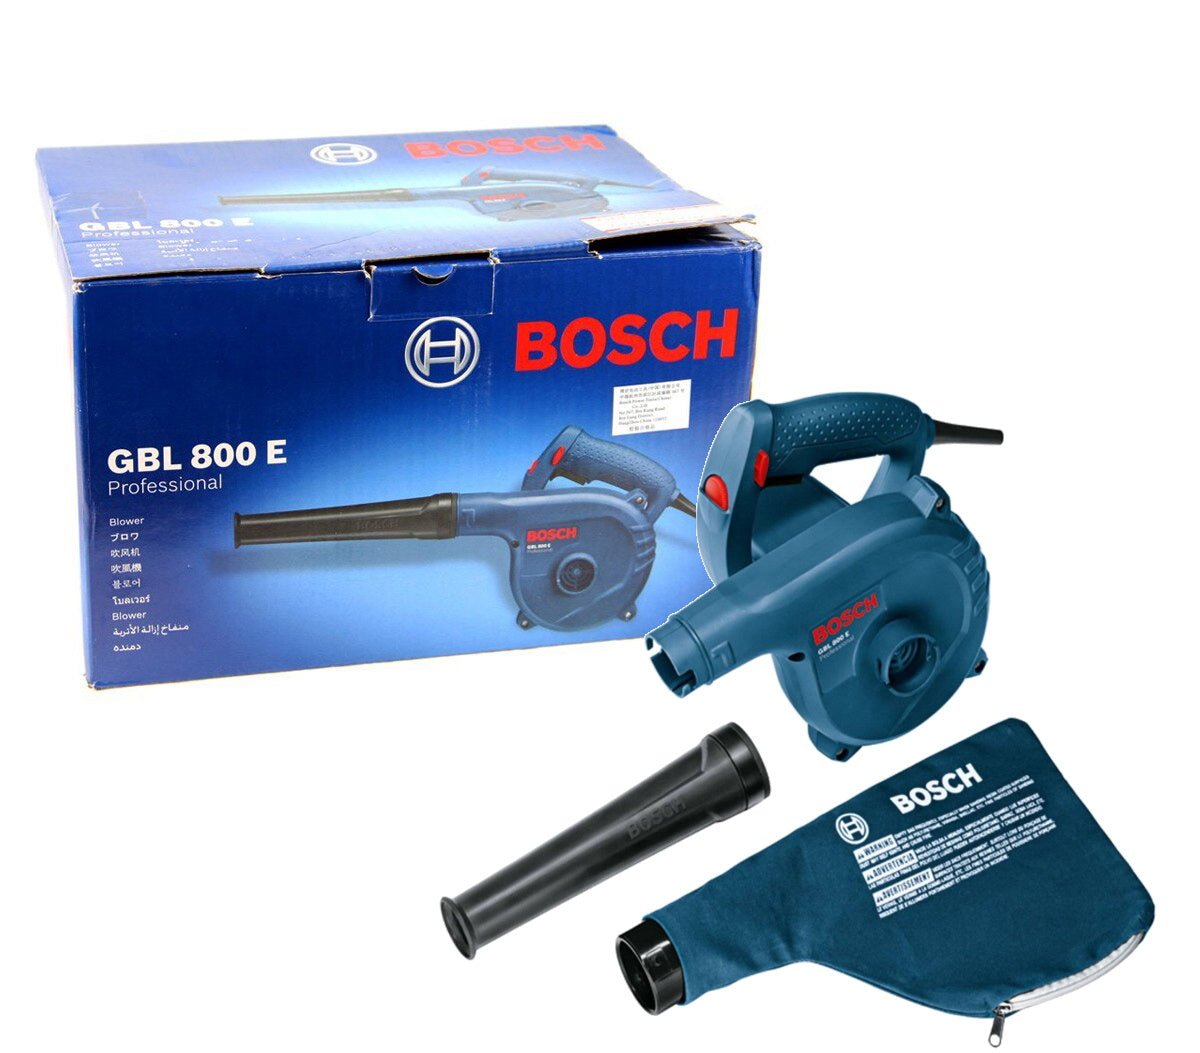 Bosch Professional Blower With Dust Extraction Gbl 800 E 0601980490 Power Tool Services